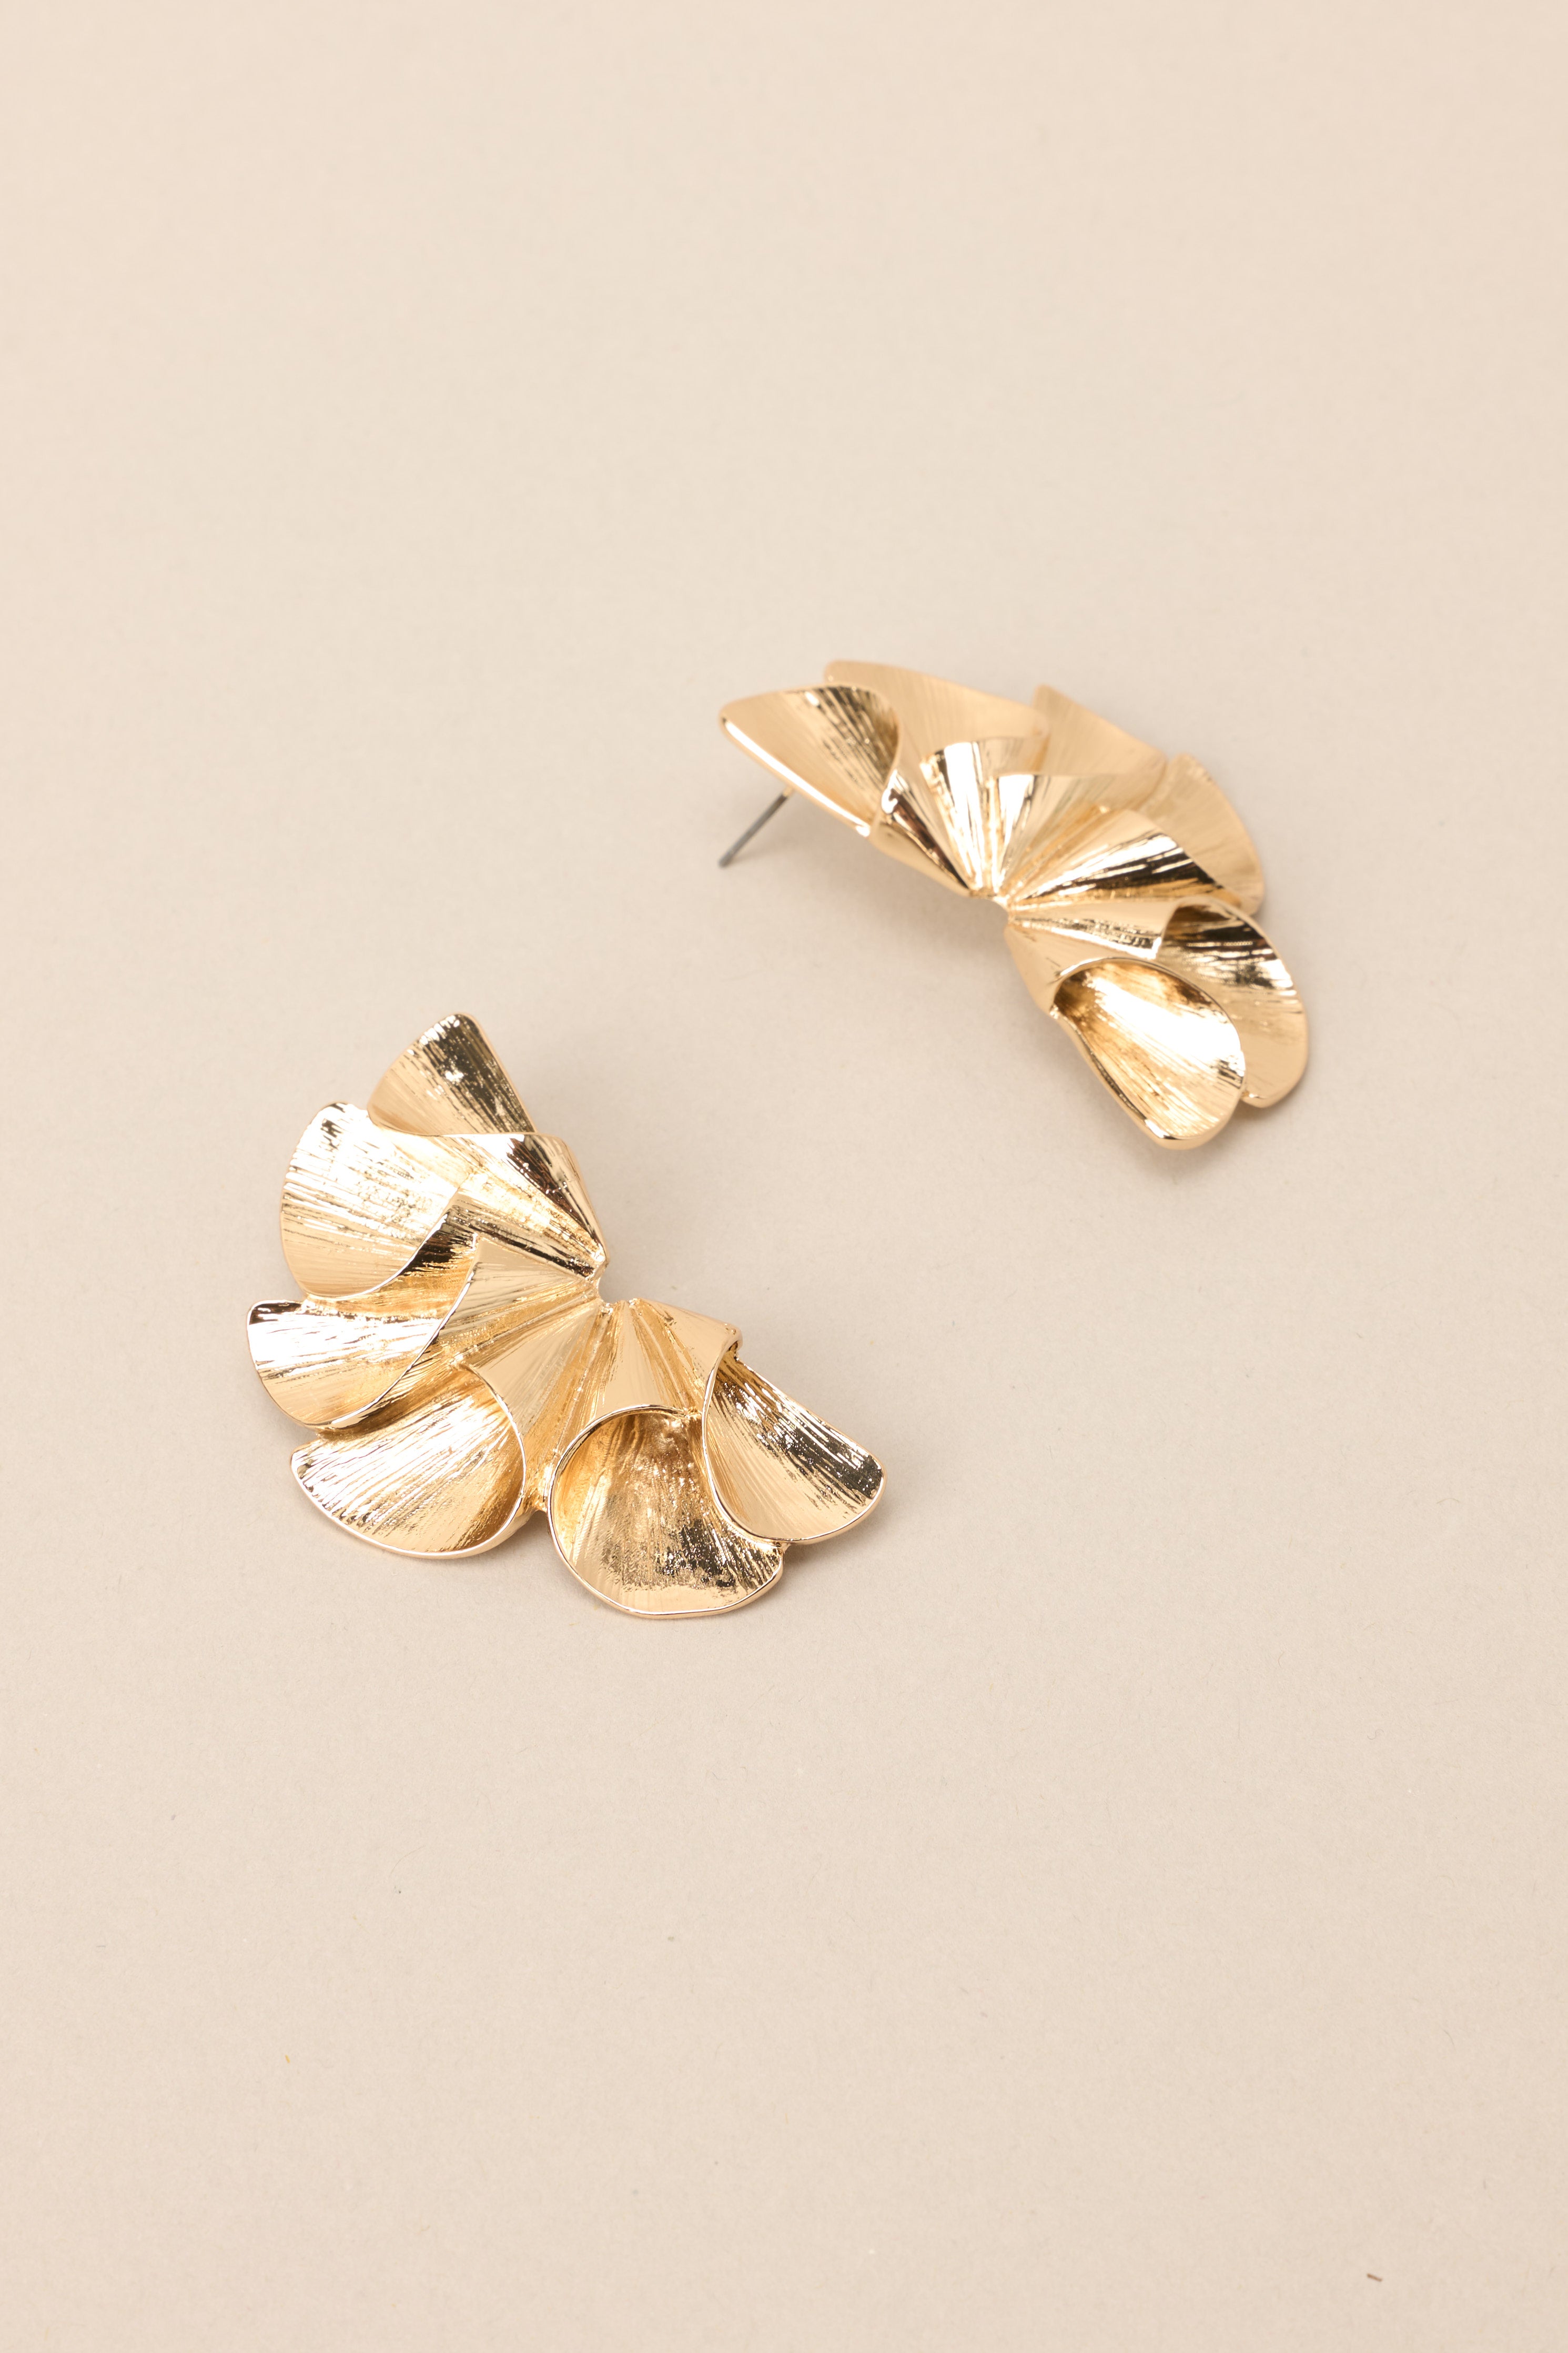 Side view of these earrings that feature gold hardware, a unique and abstract design, and secure post backings.